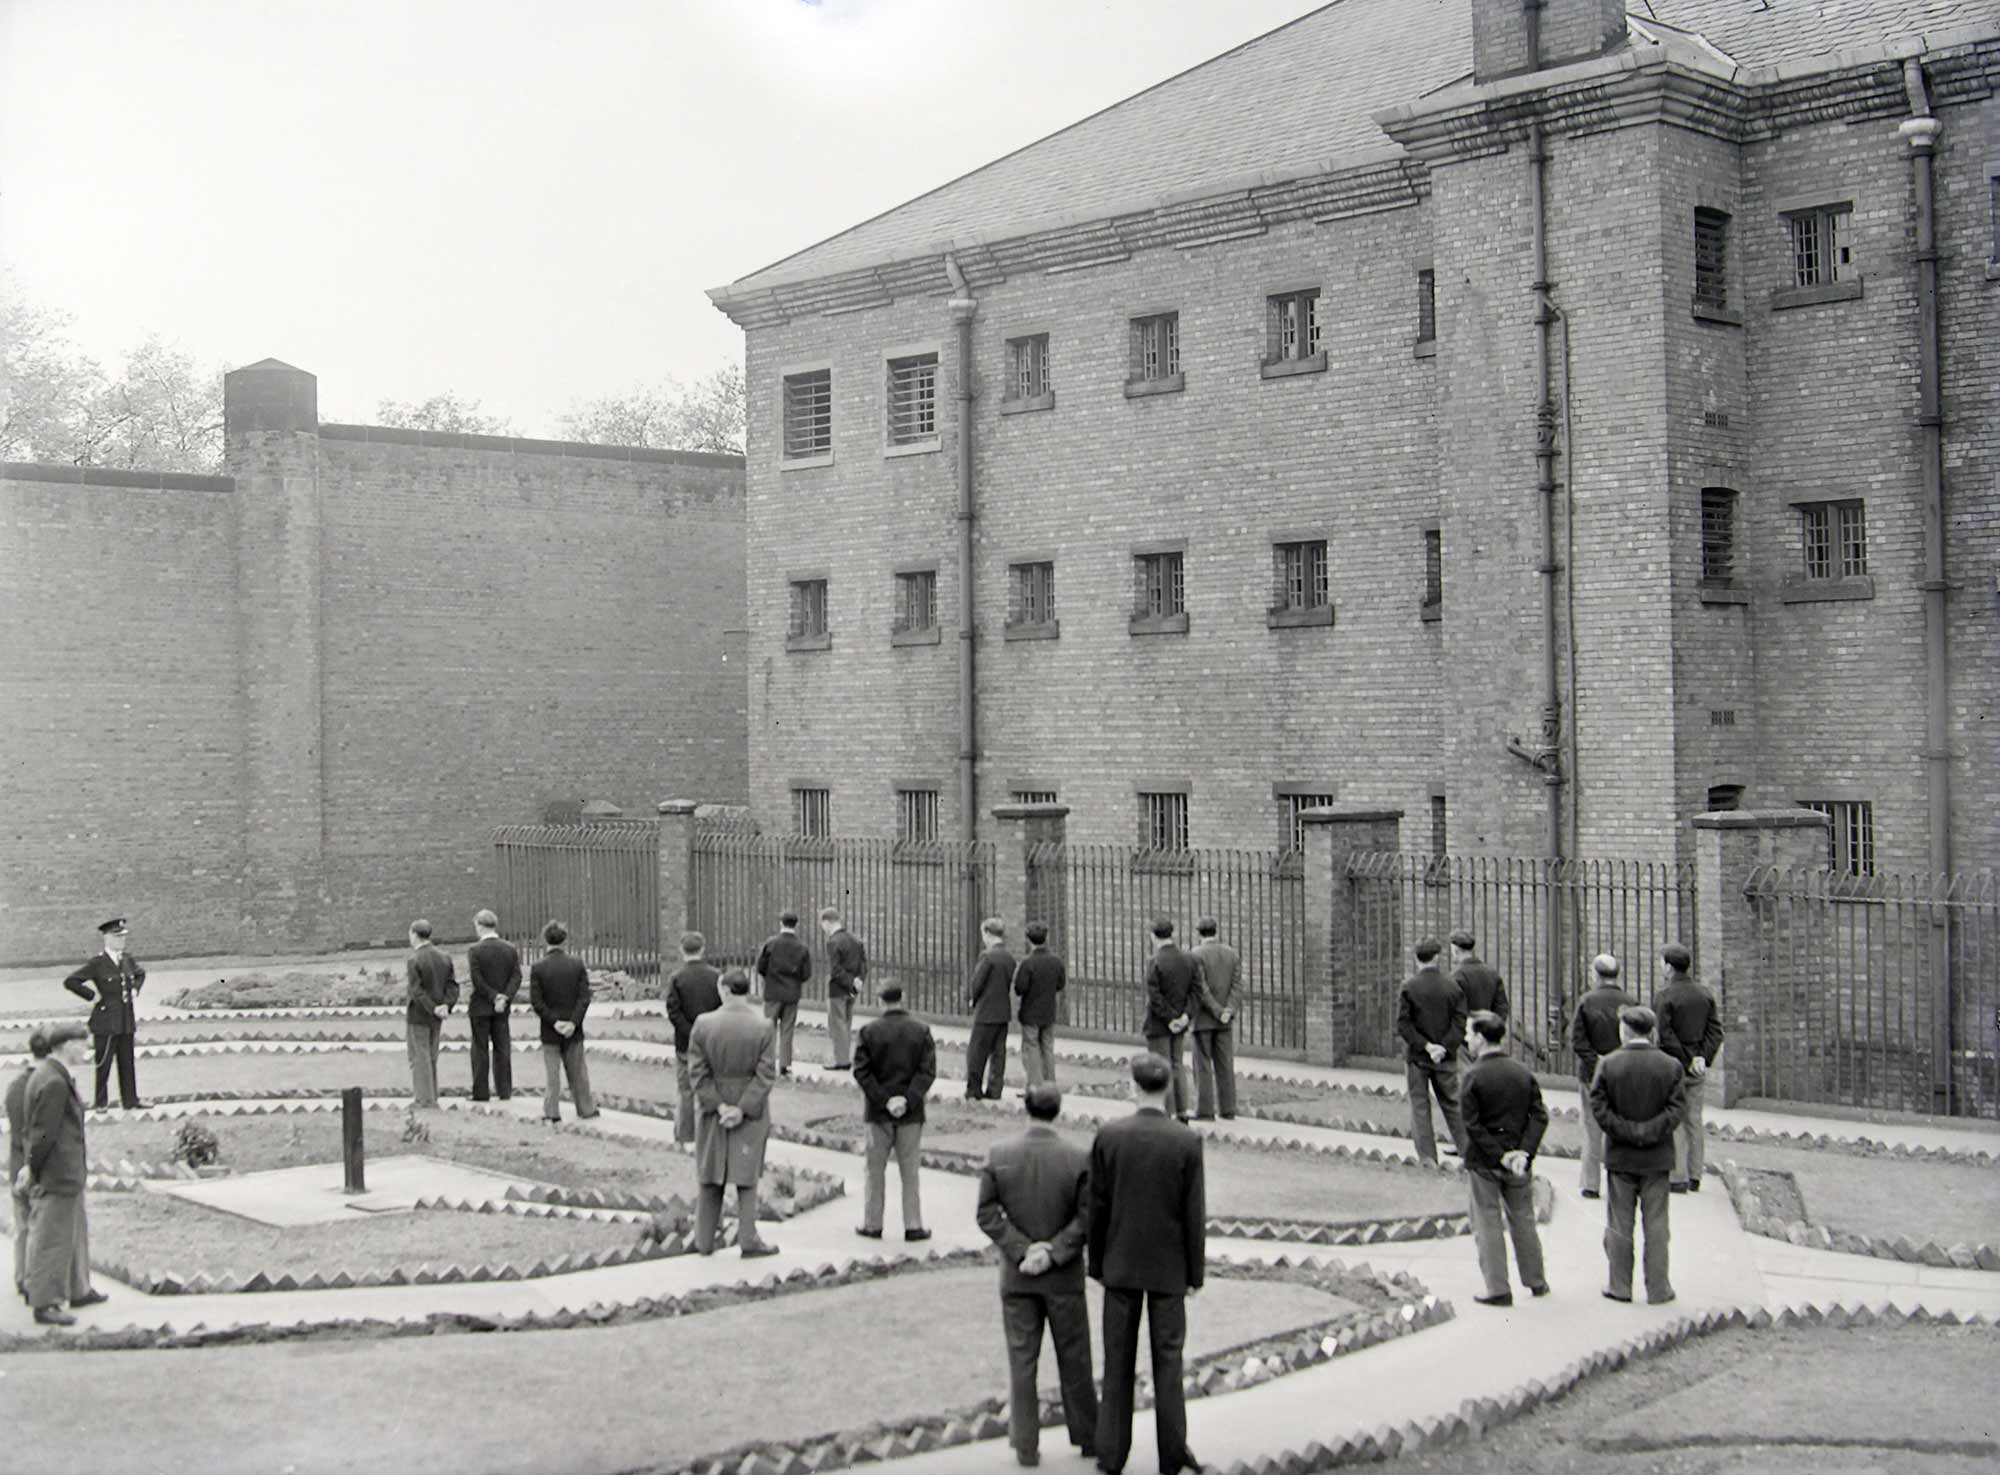 HM Prison Leicester exercise yard, mid-20th Century - Leicester and Leicestershire Record Office